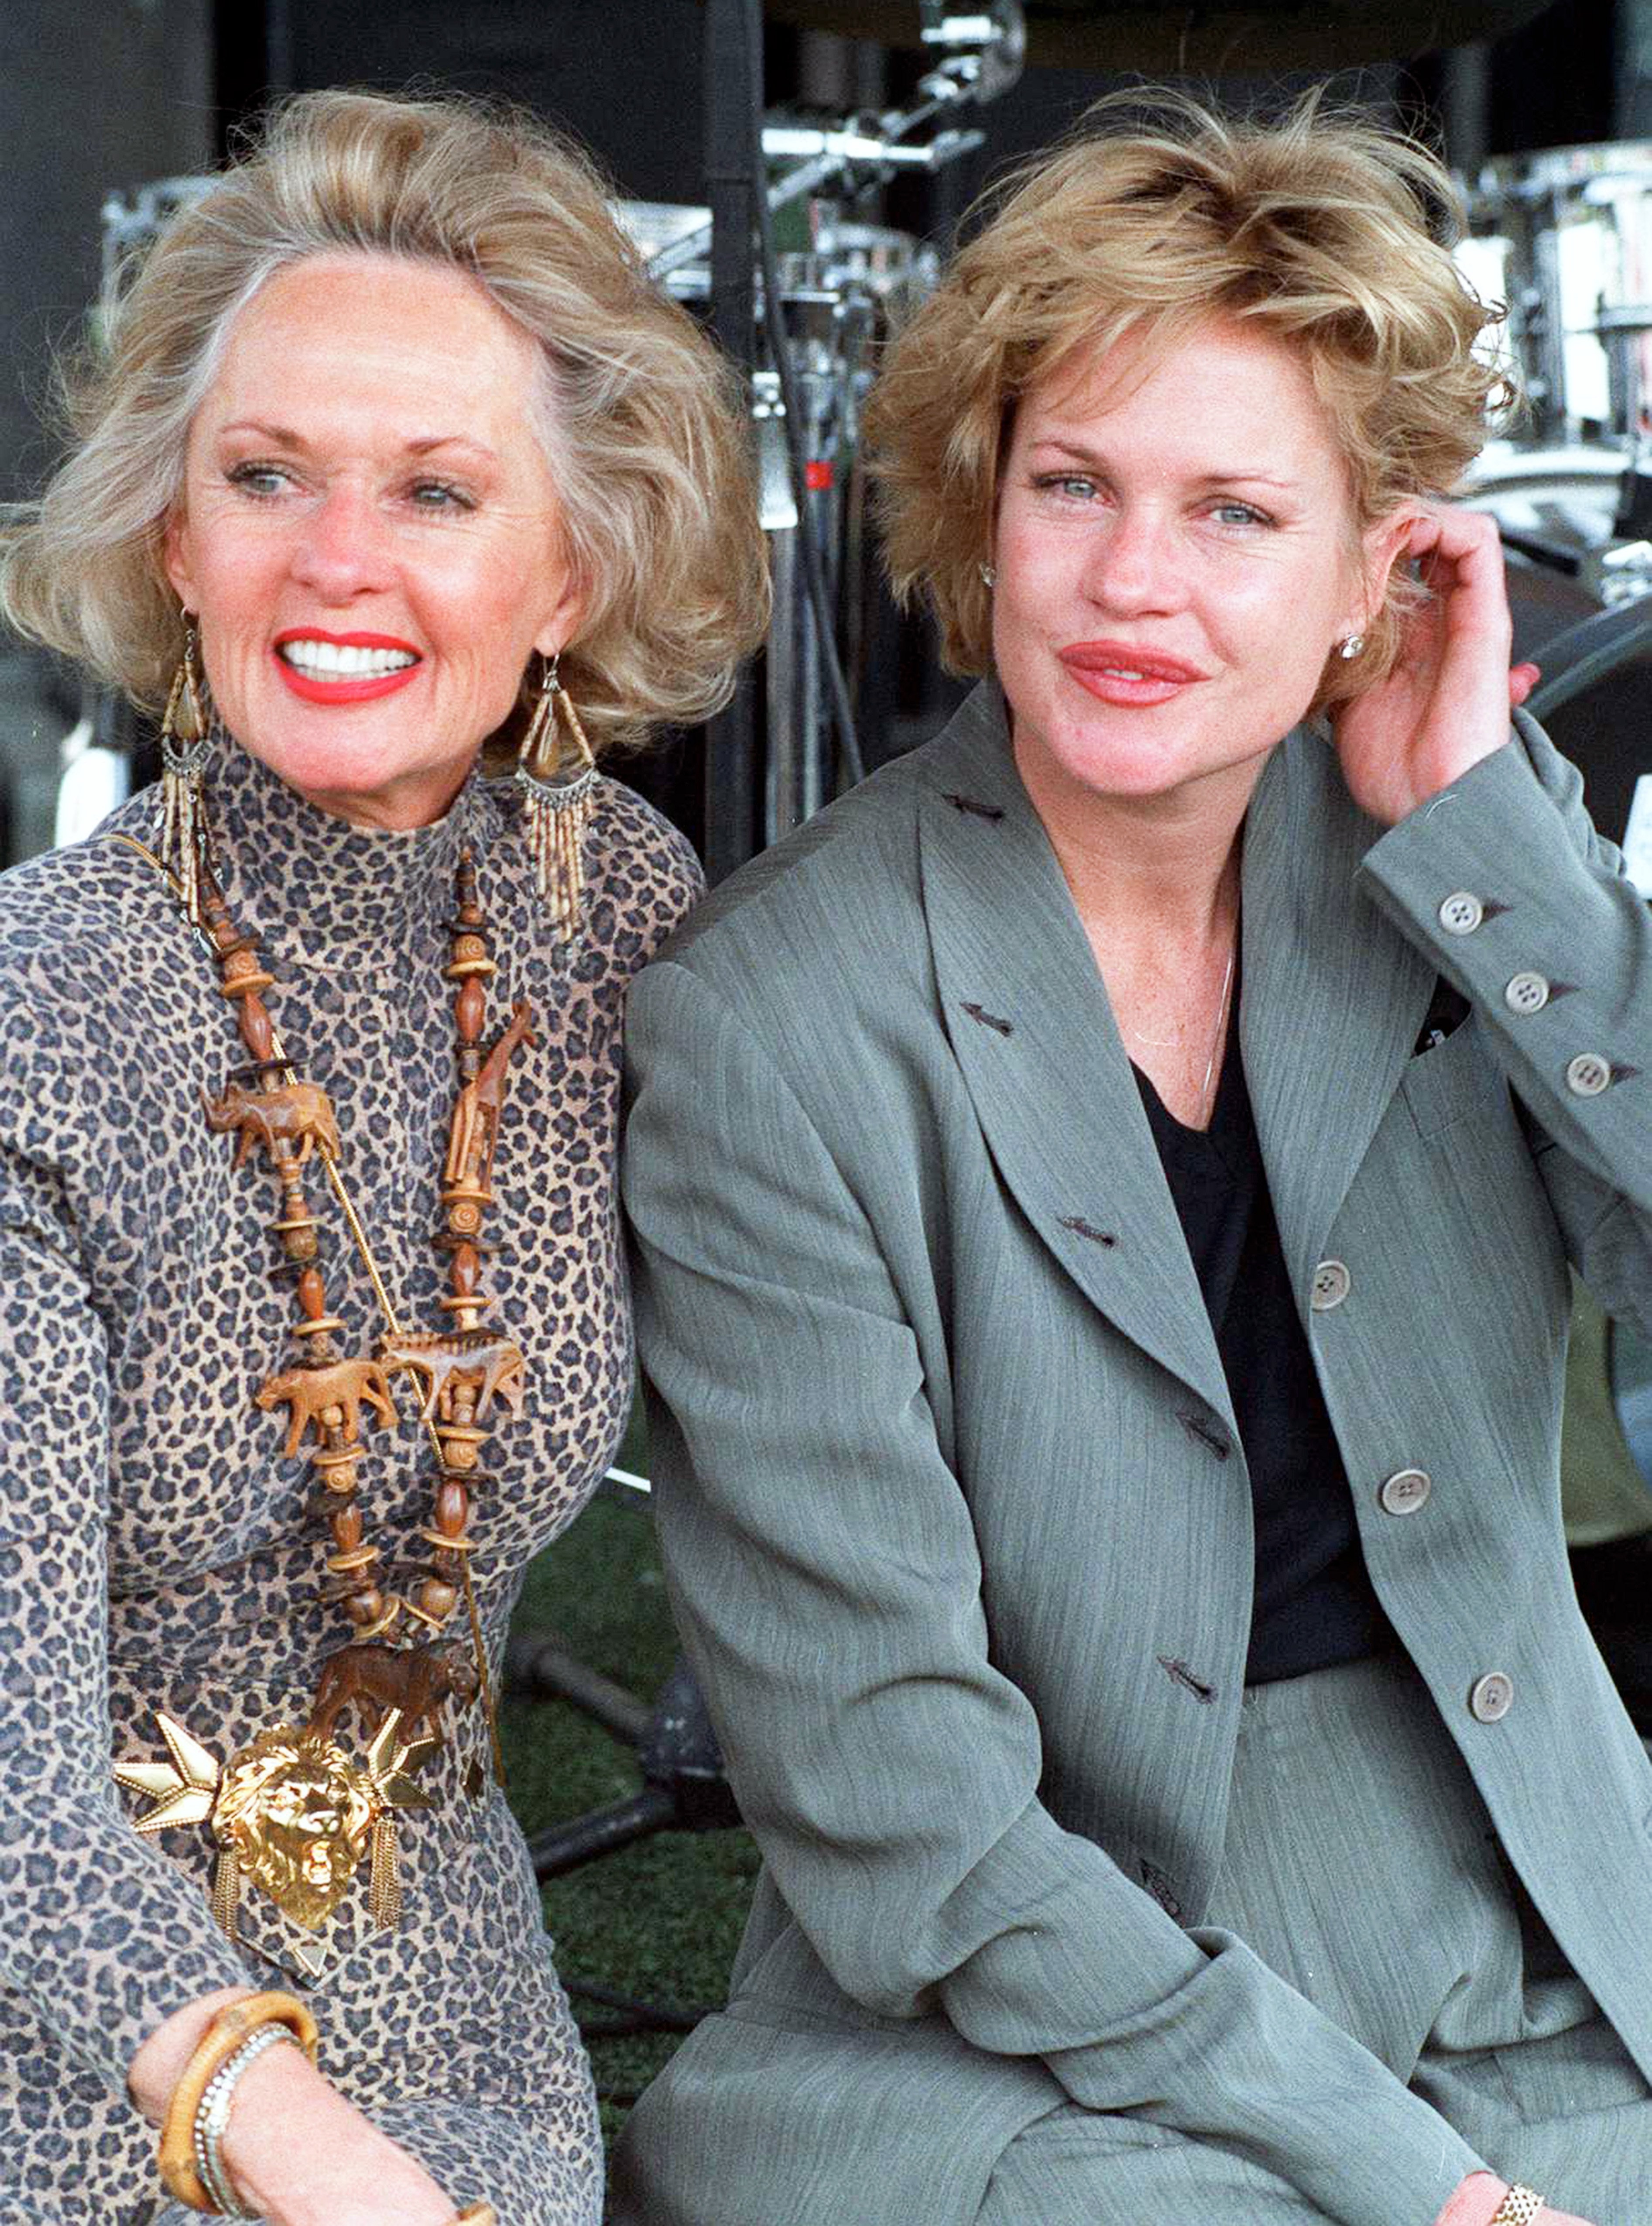 Melanie Griffith and her mother Tippi Hedren at the 'Artists for Shambala' Animal Preservation Benefit, 1994. | Photo: Getty Images